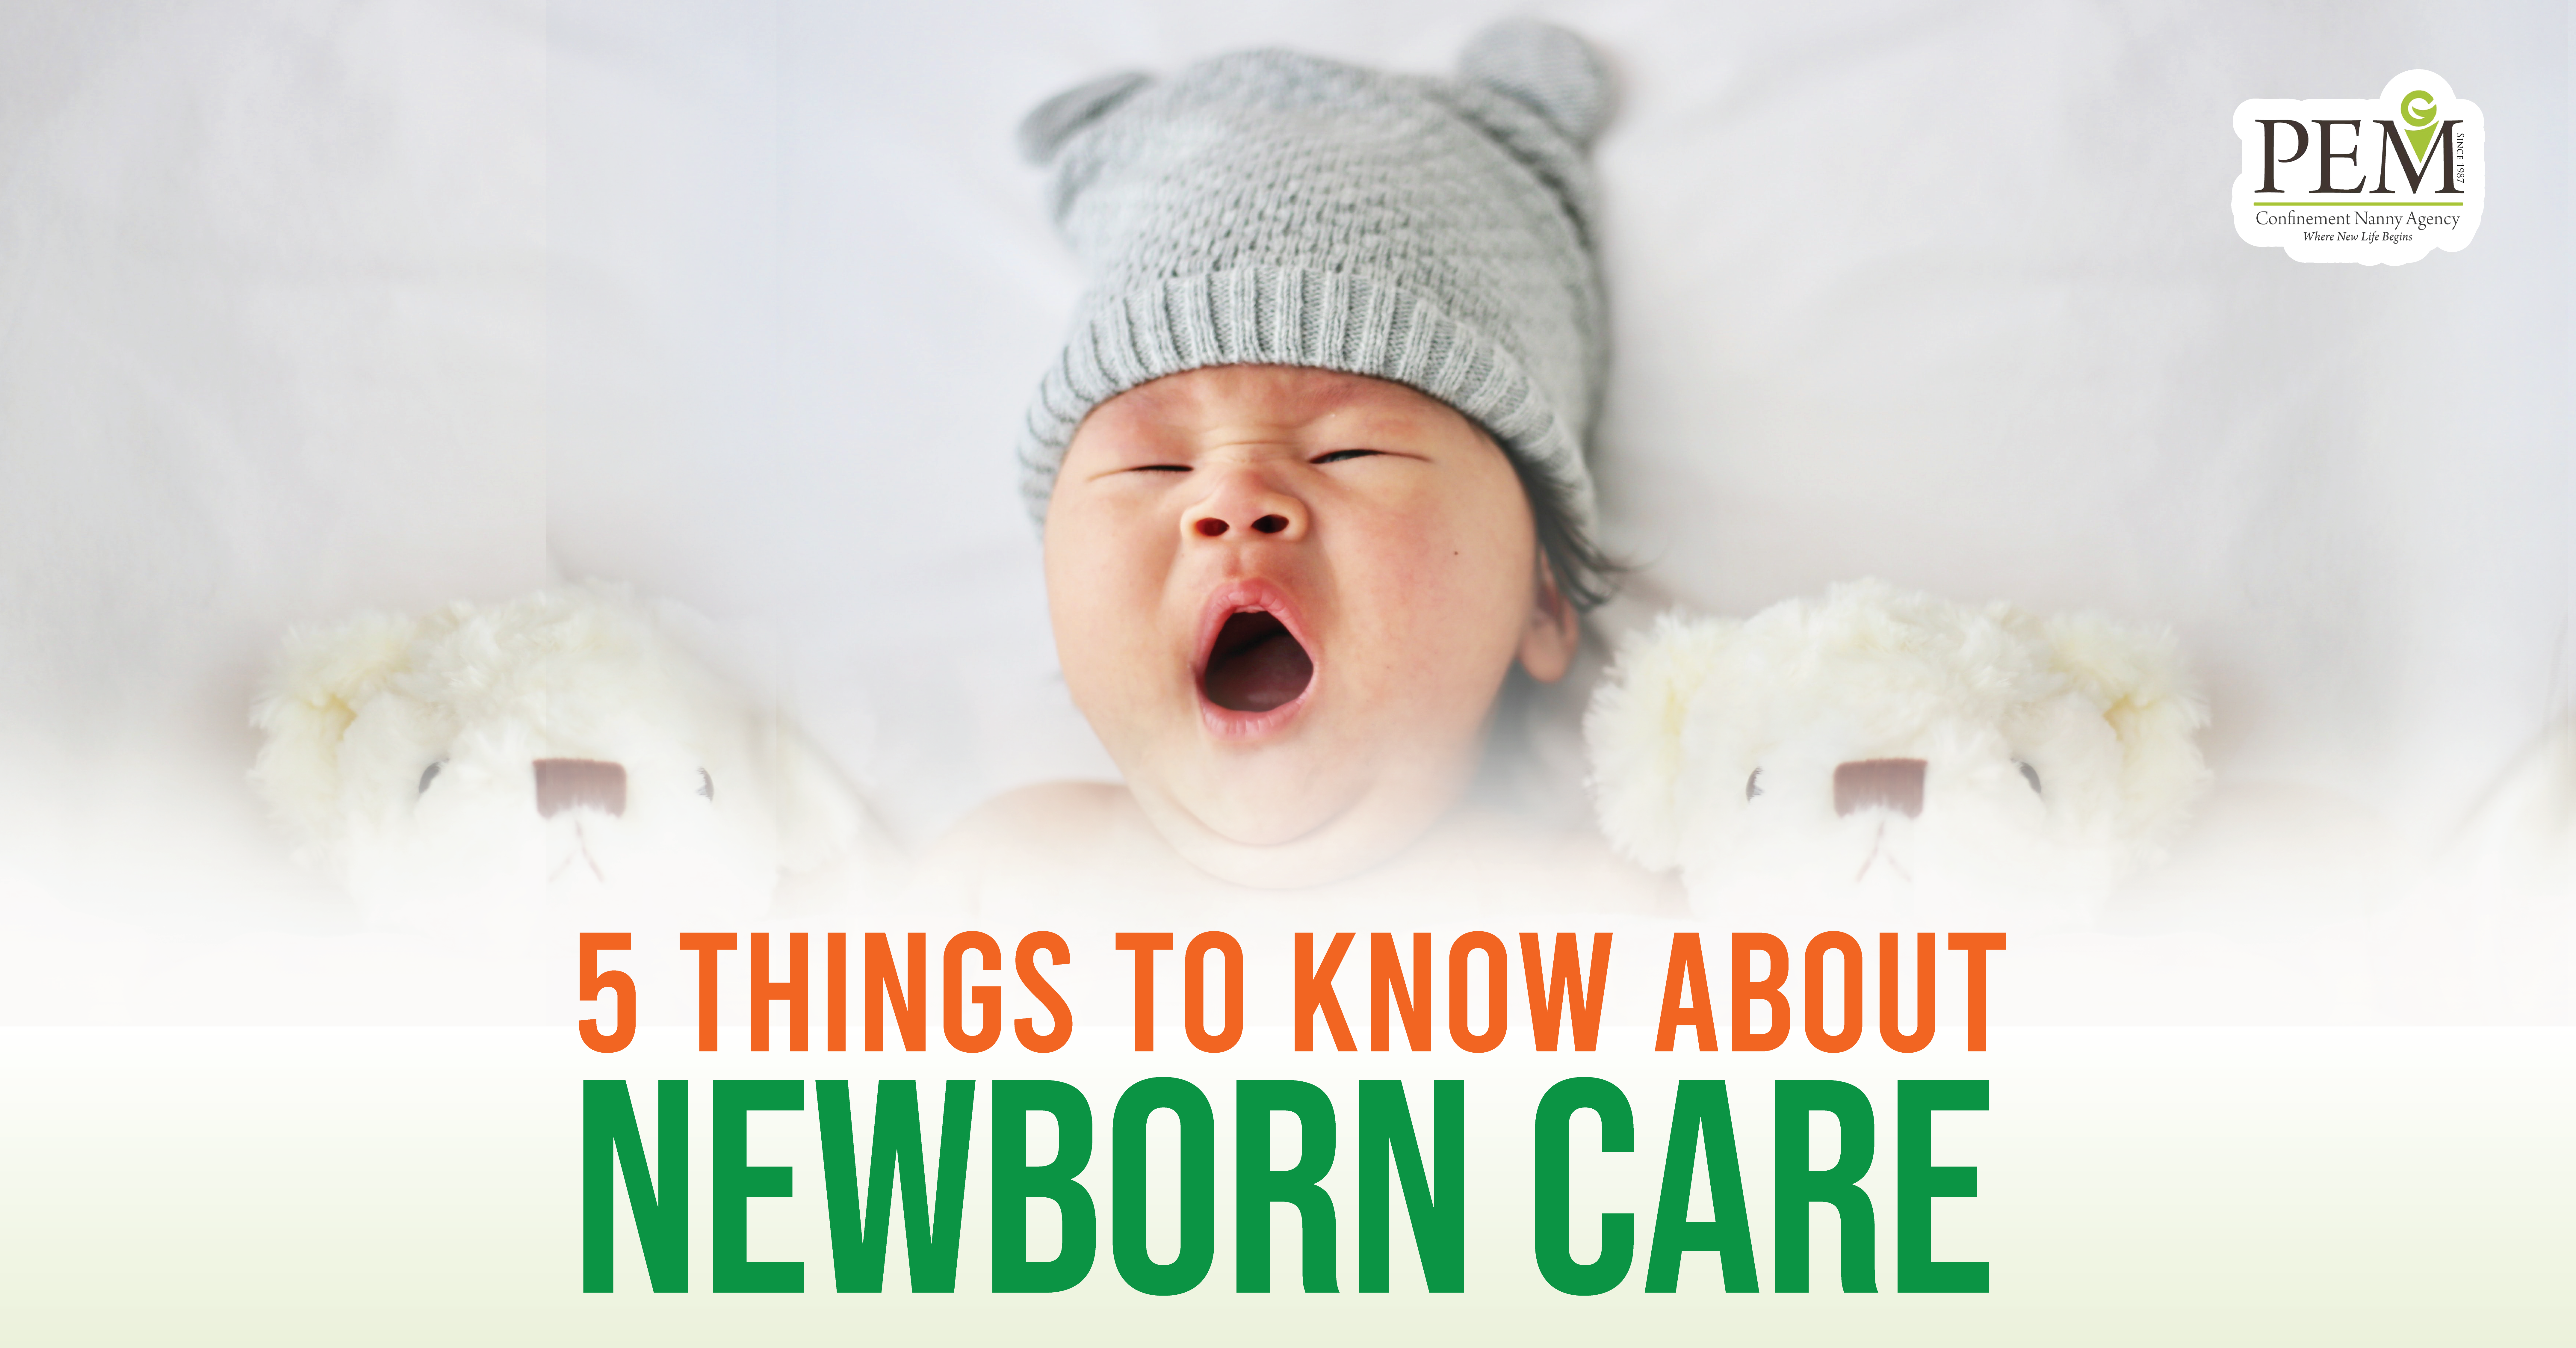 Things to Know About Newborn Care - PEM Confinement